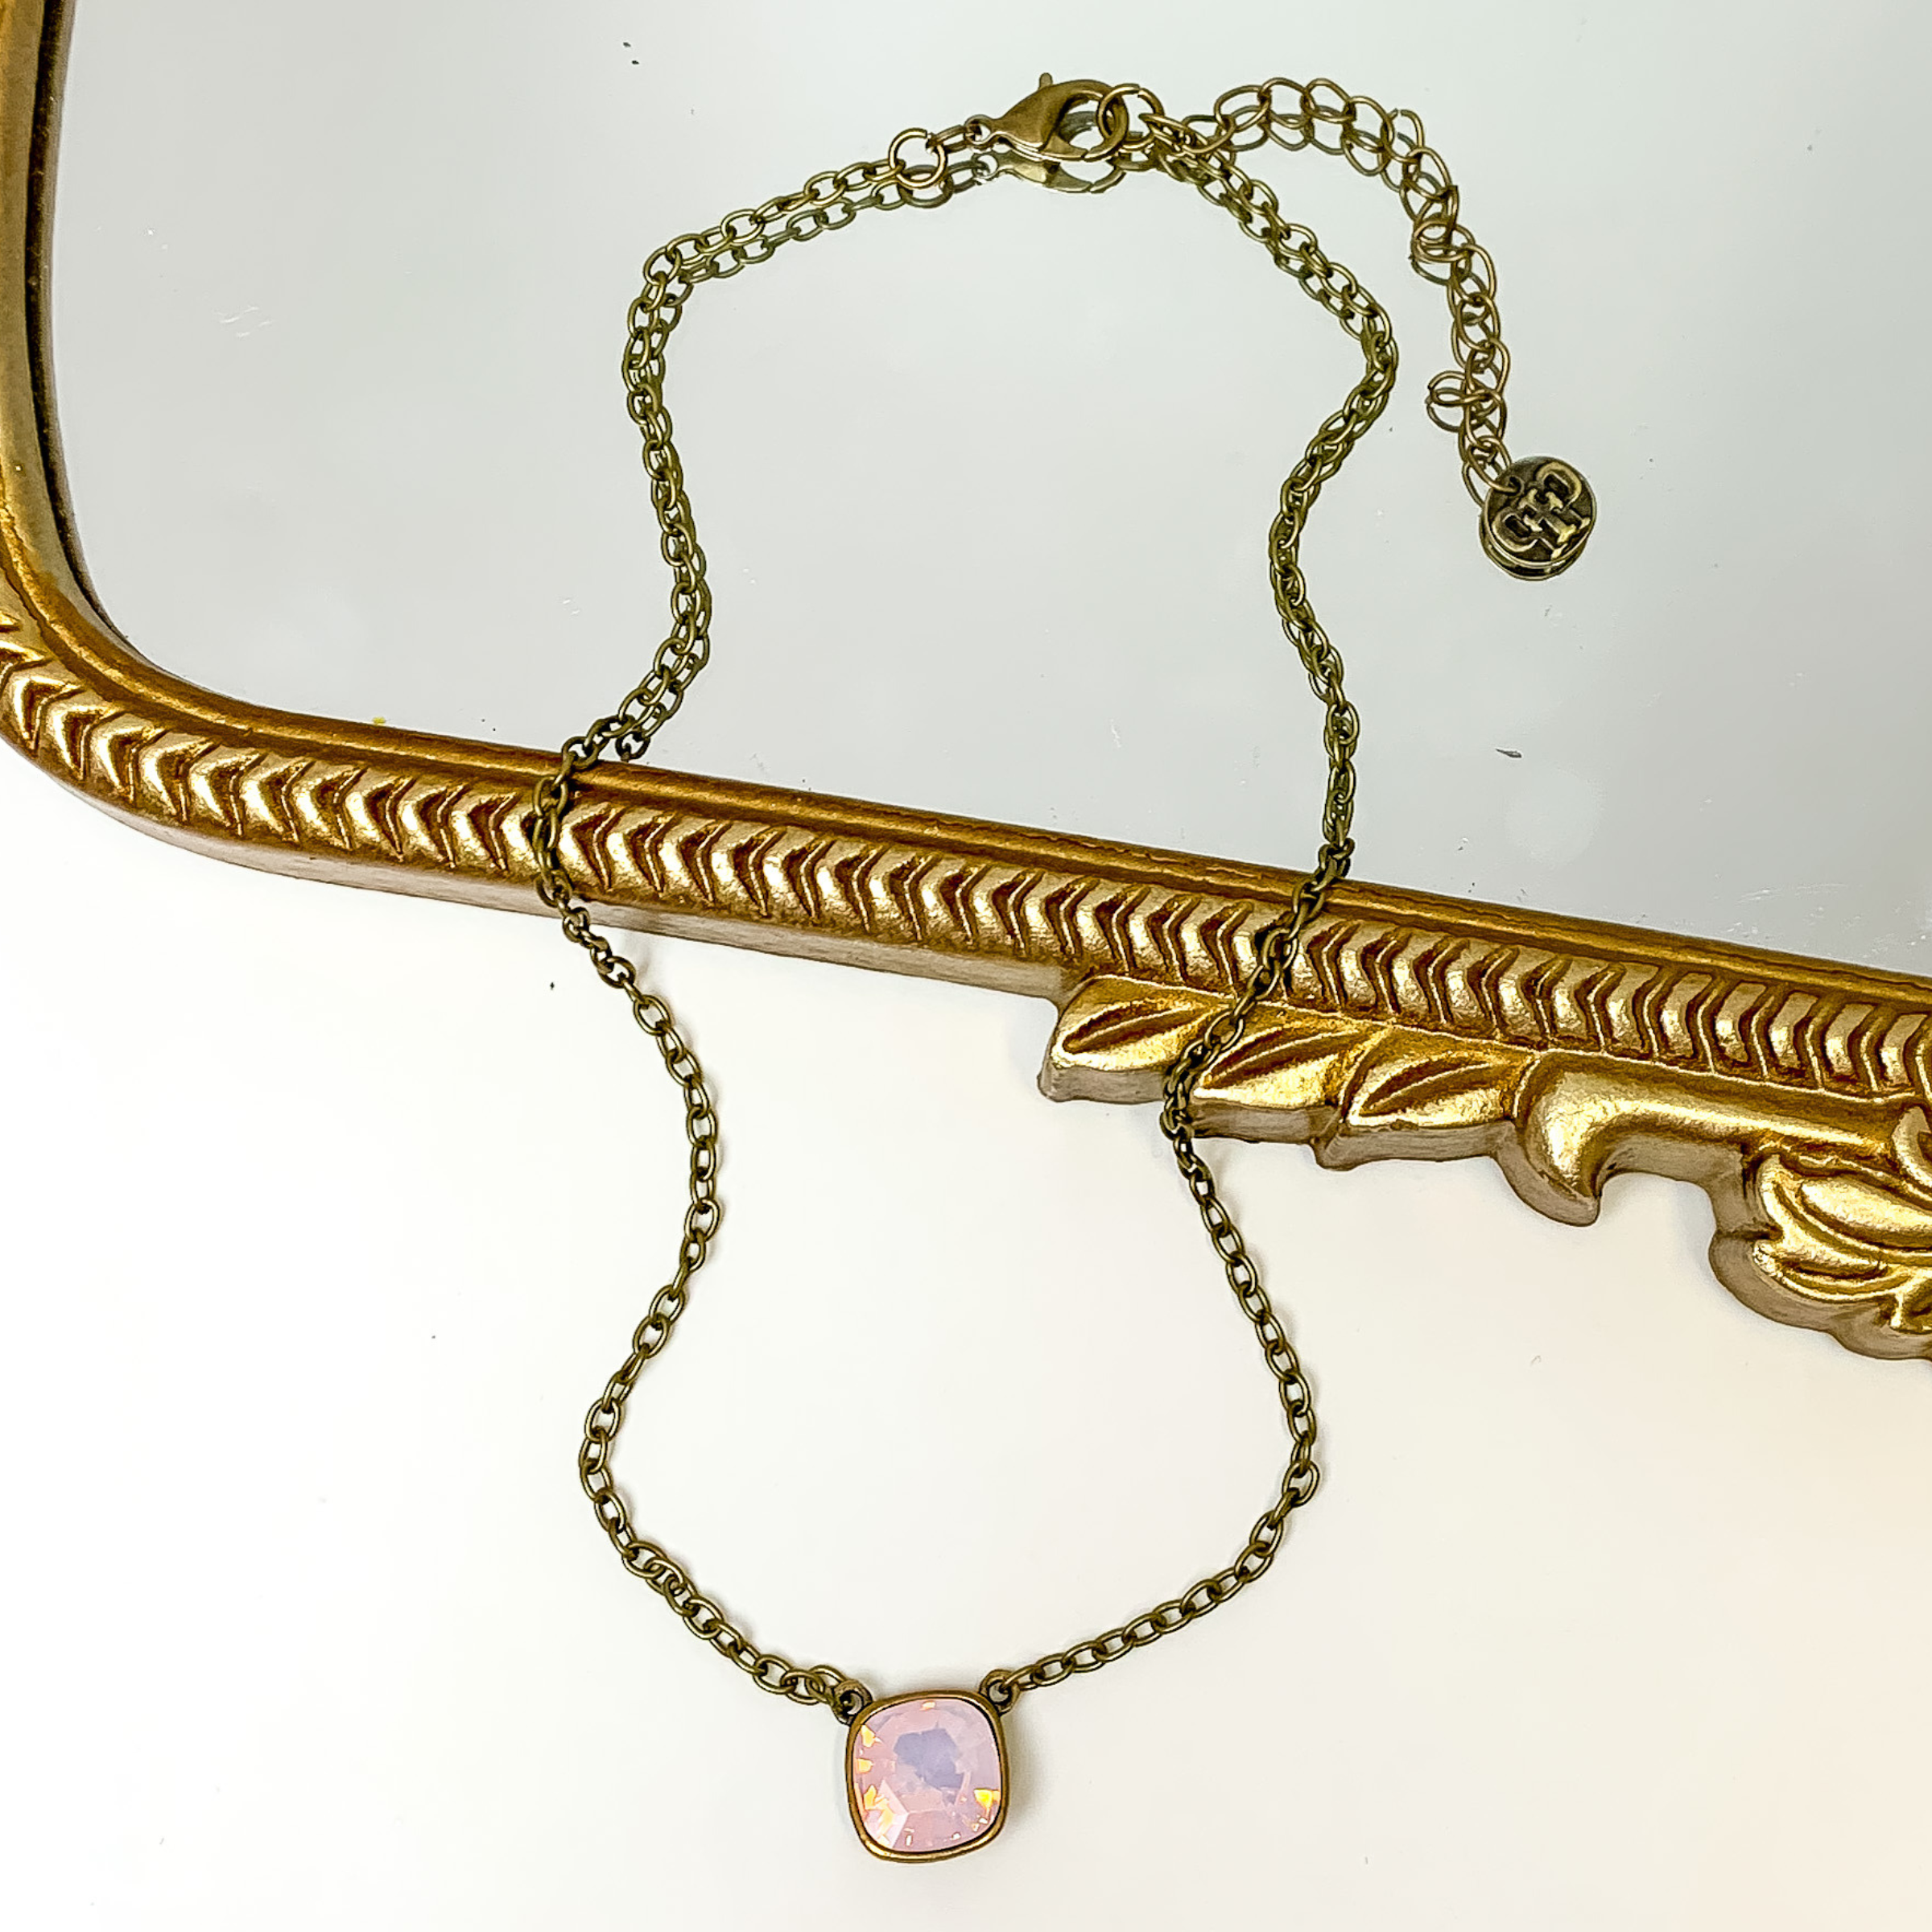 Bronze chain necklace with a rose water opal cushion cut crystal. This necklace is pictured partially laying on a gold mirror on a white background.